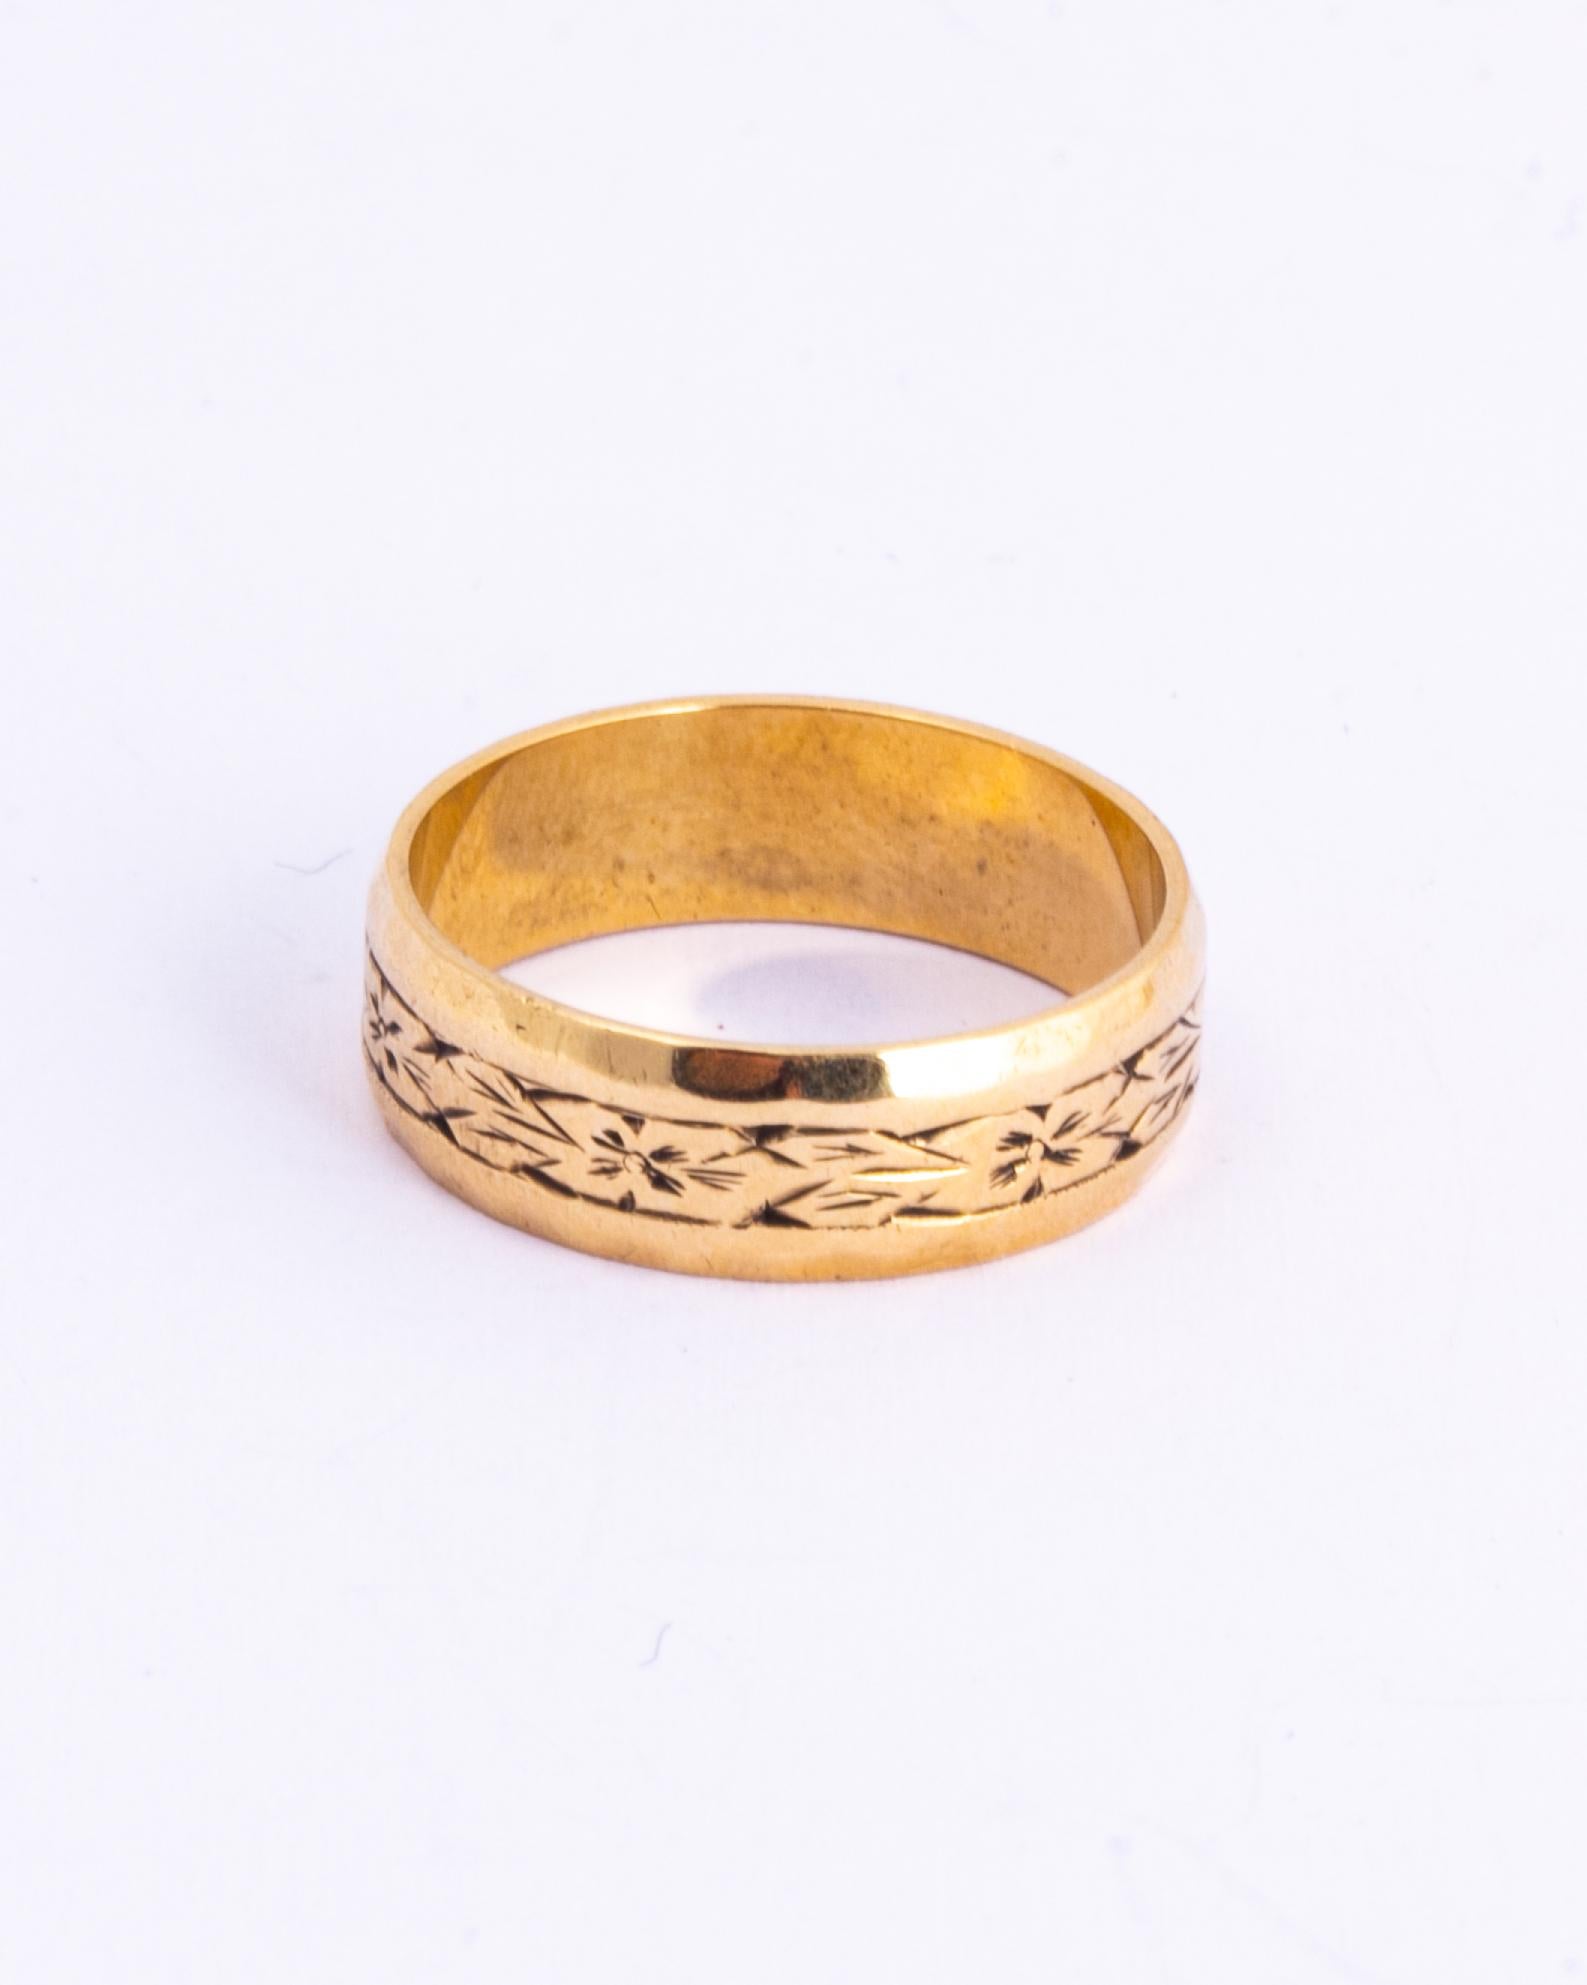 The 9ct gold band is engraved with a fancy design through the centre of the band. Made in London, England. 

Ring Size: L 1/2 or 6 
Band Width: 6mm

Weight: 3g